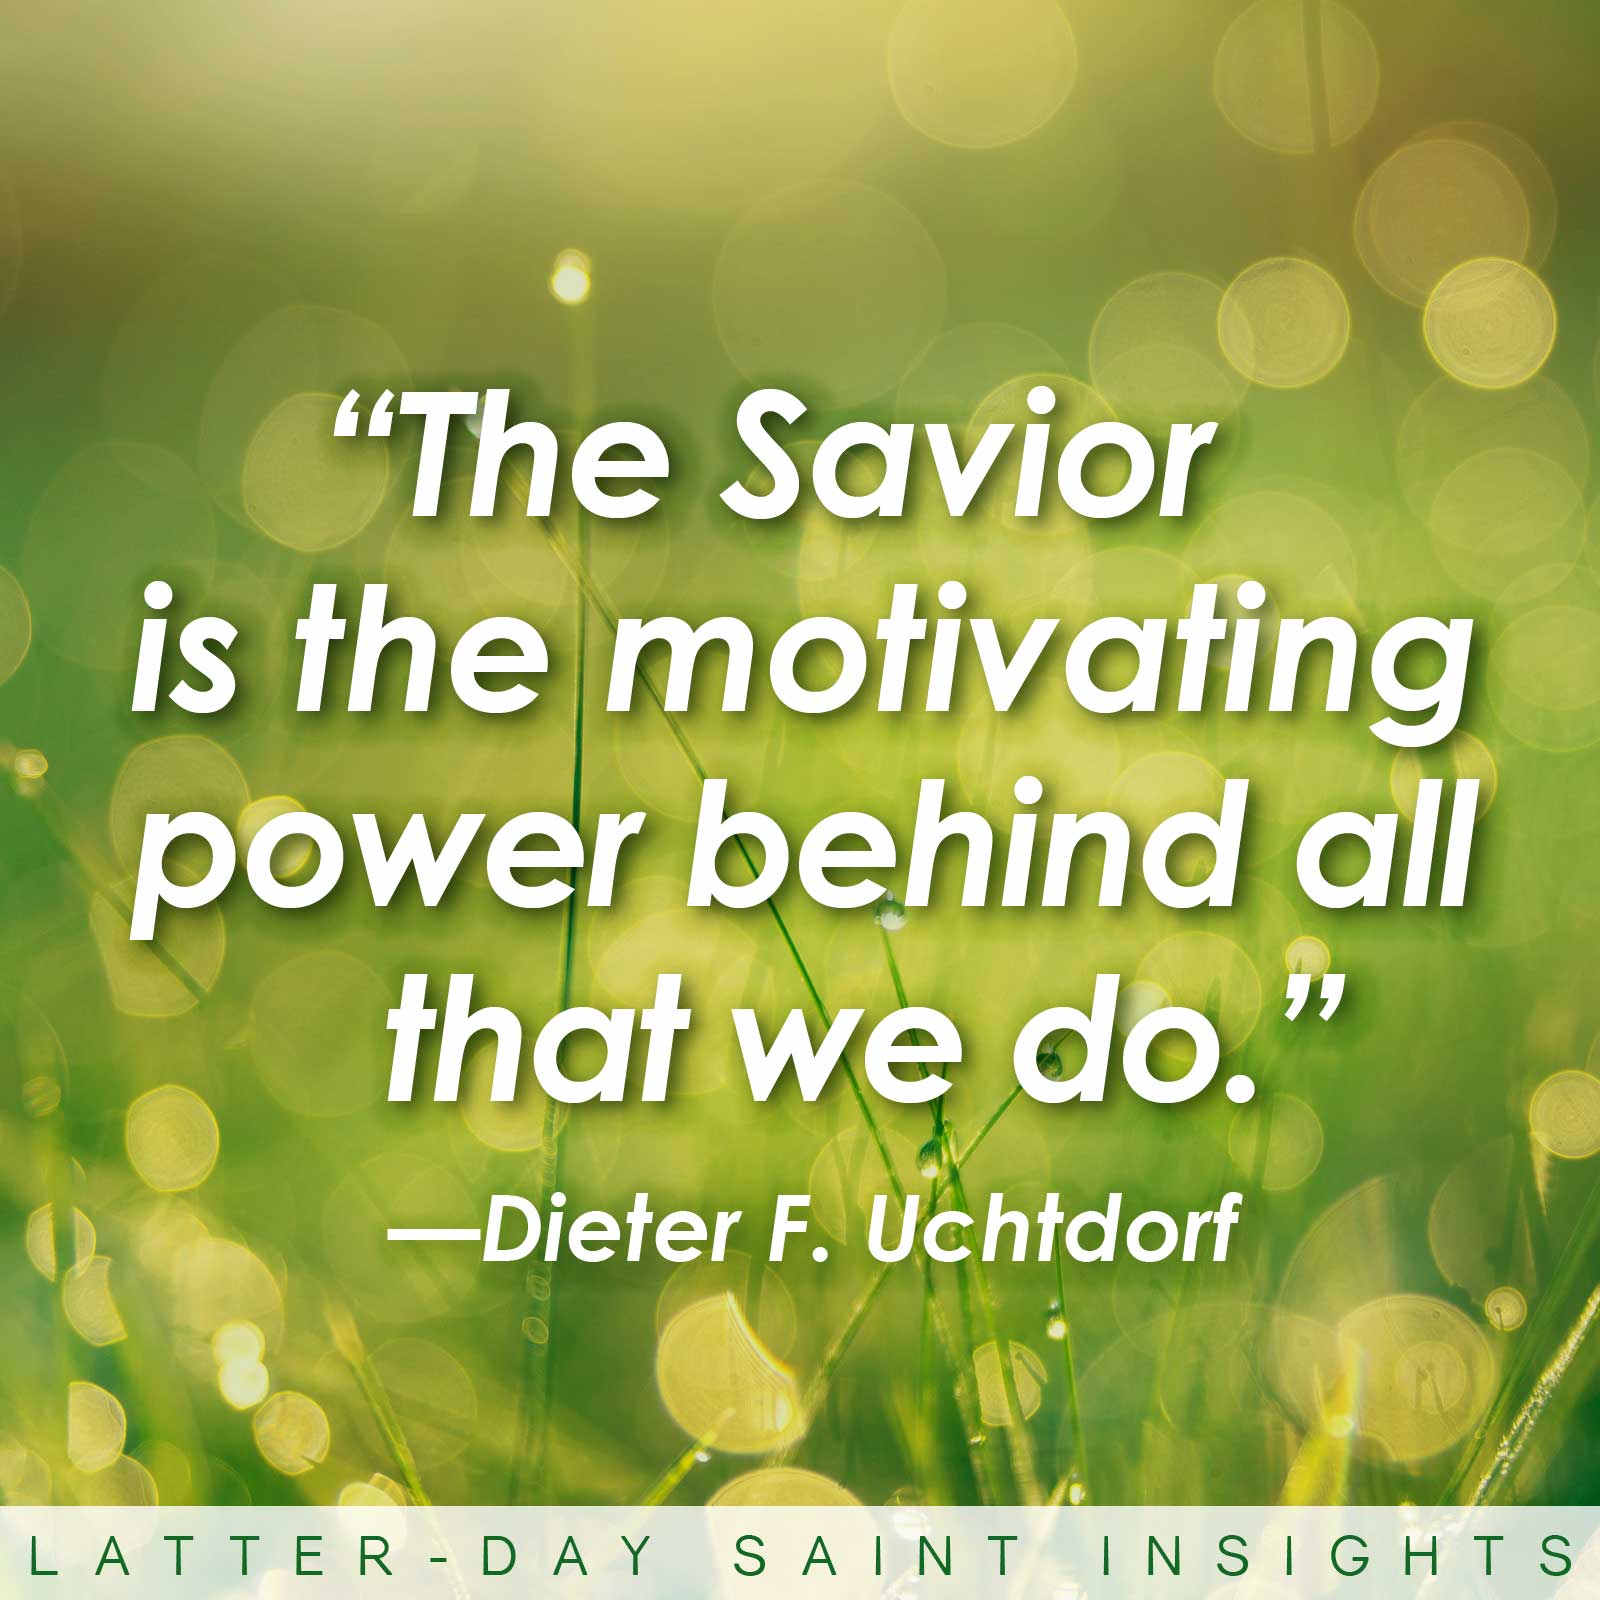 "The Savior is the motivating power behind all that we do." By Dieter F. Uchtdorf